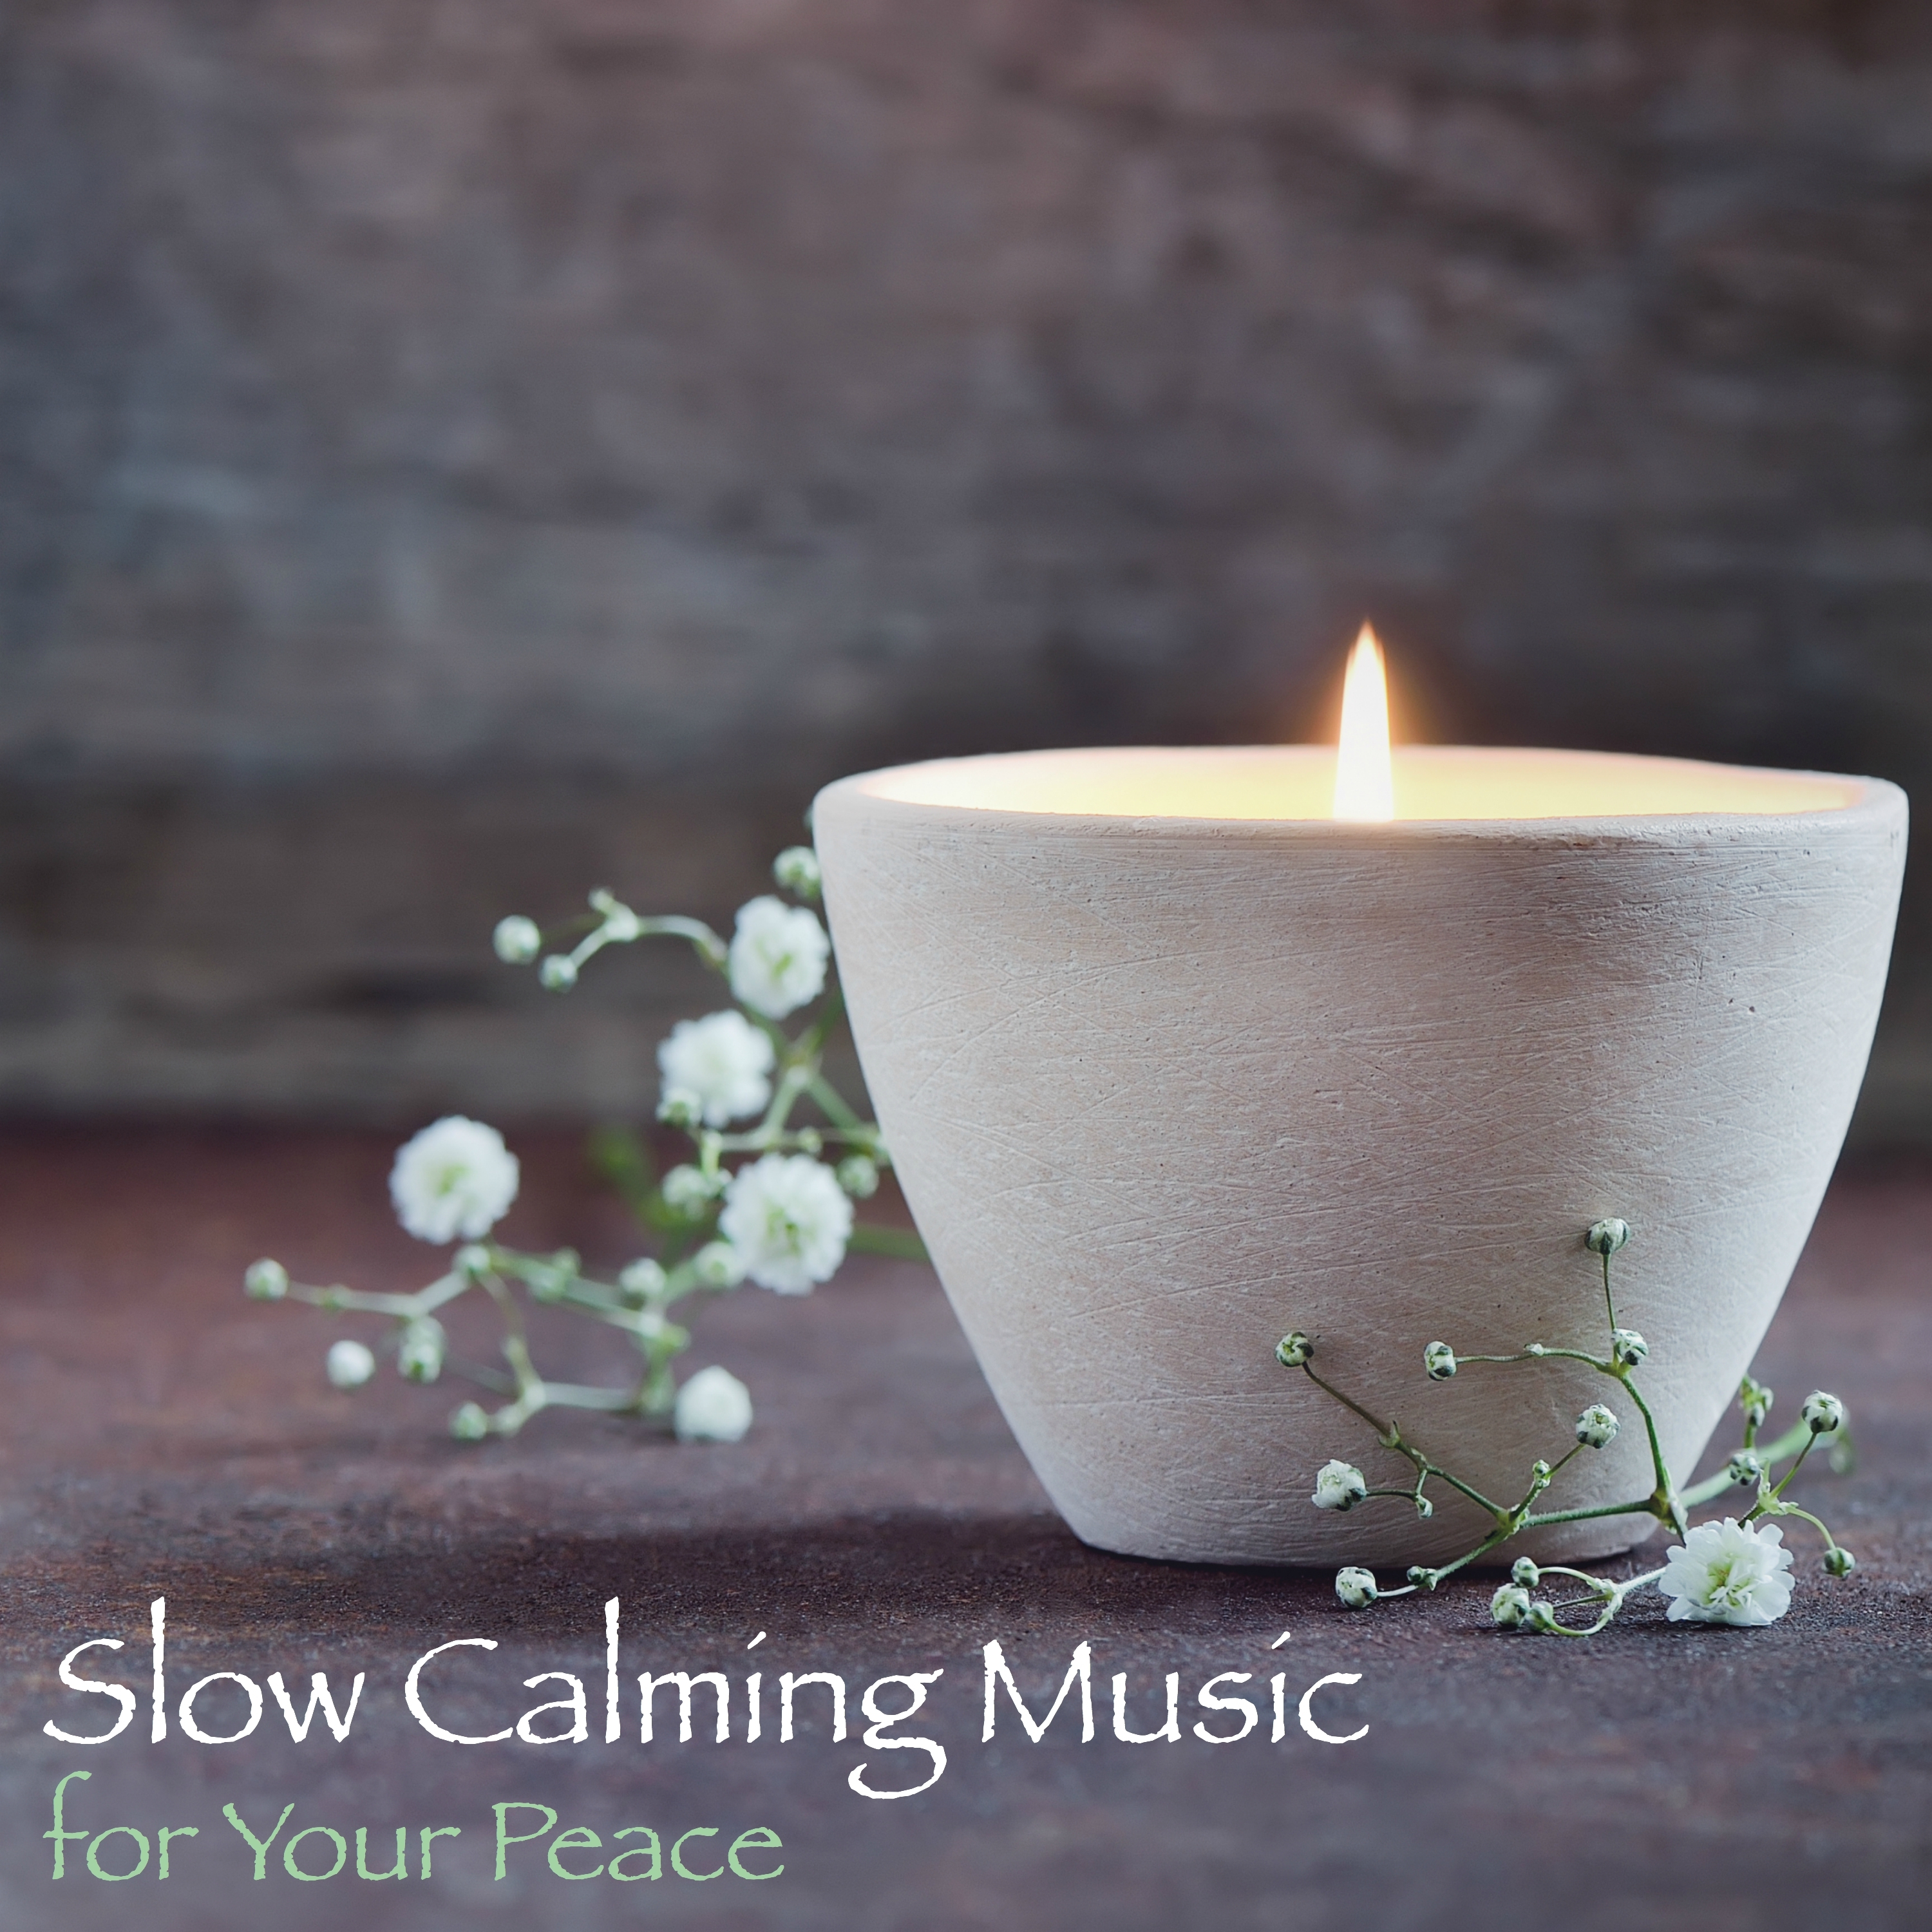 Healing and Calming Music for the Soul